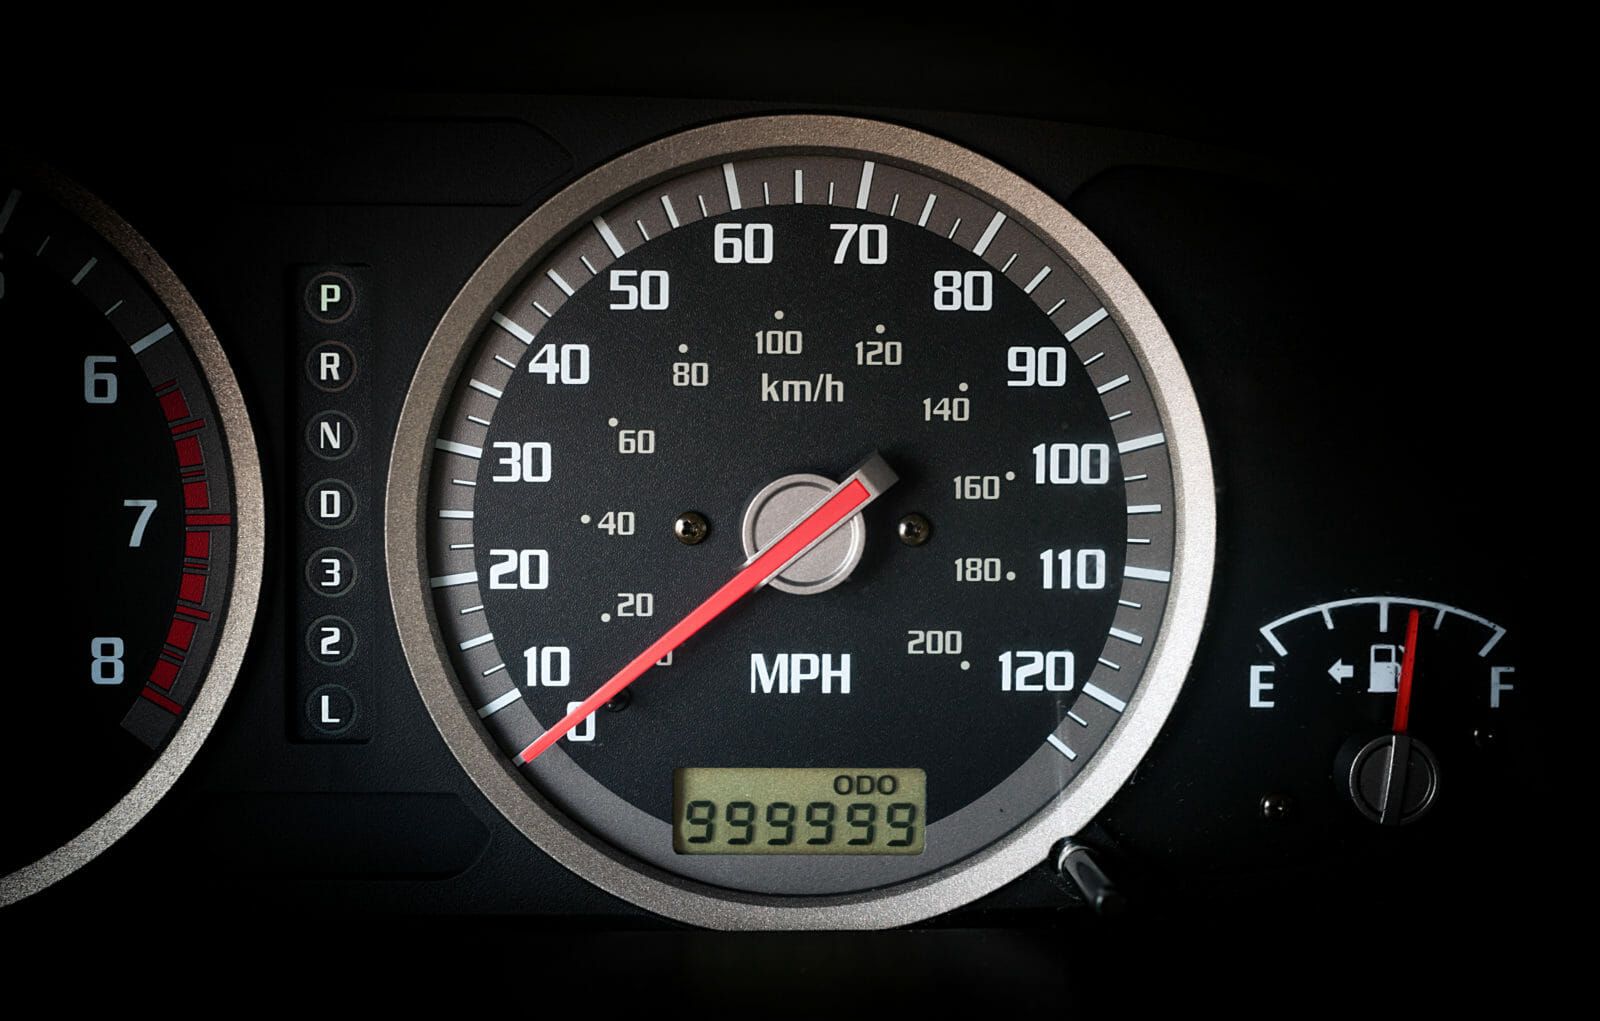 Car dashboard odometer with 999999 miles on it